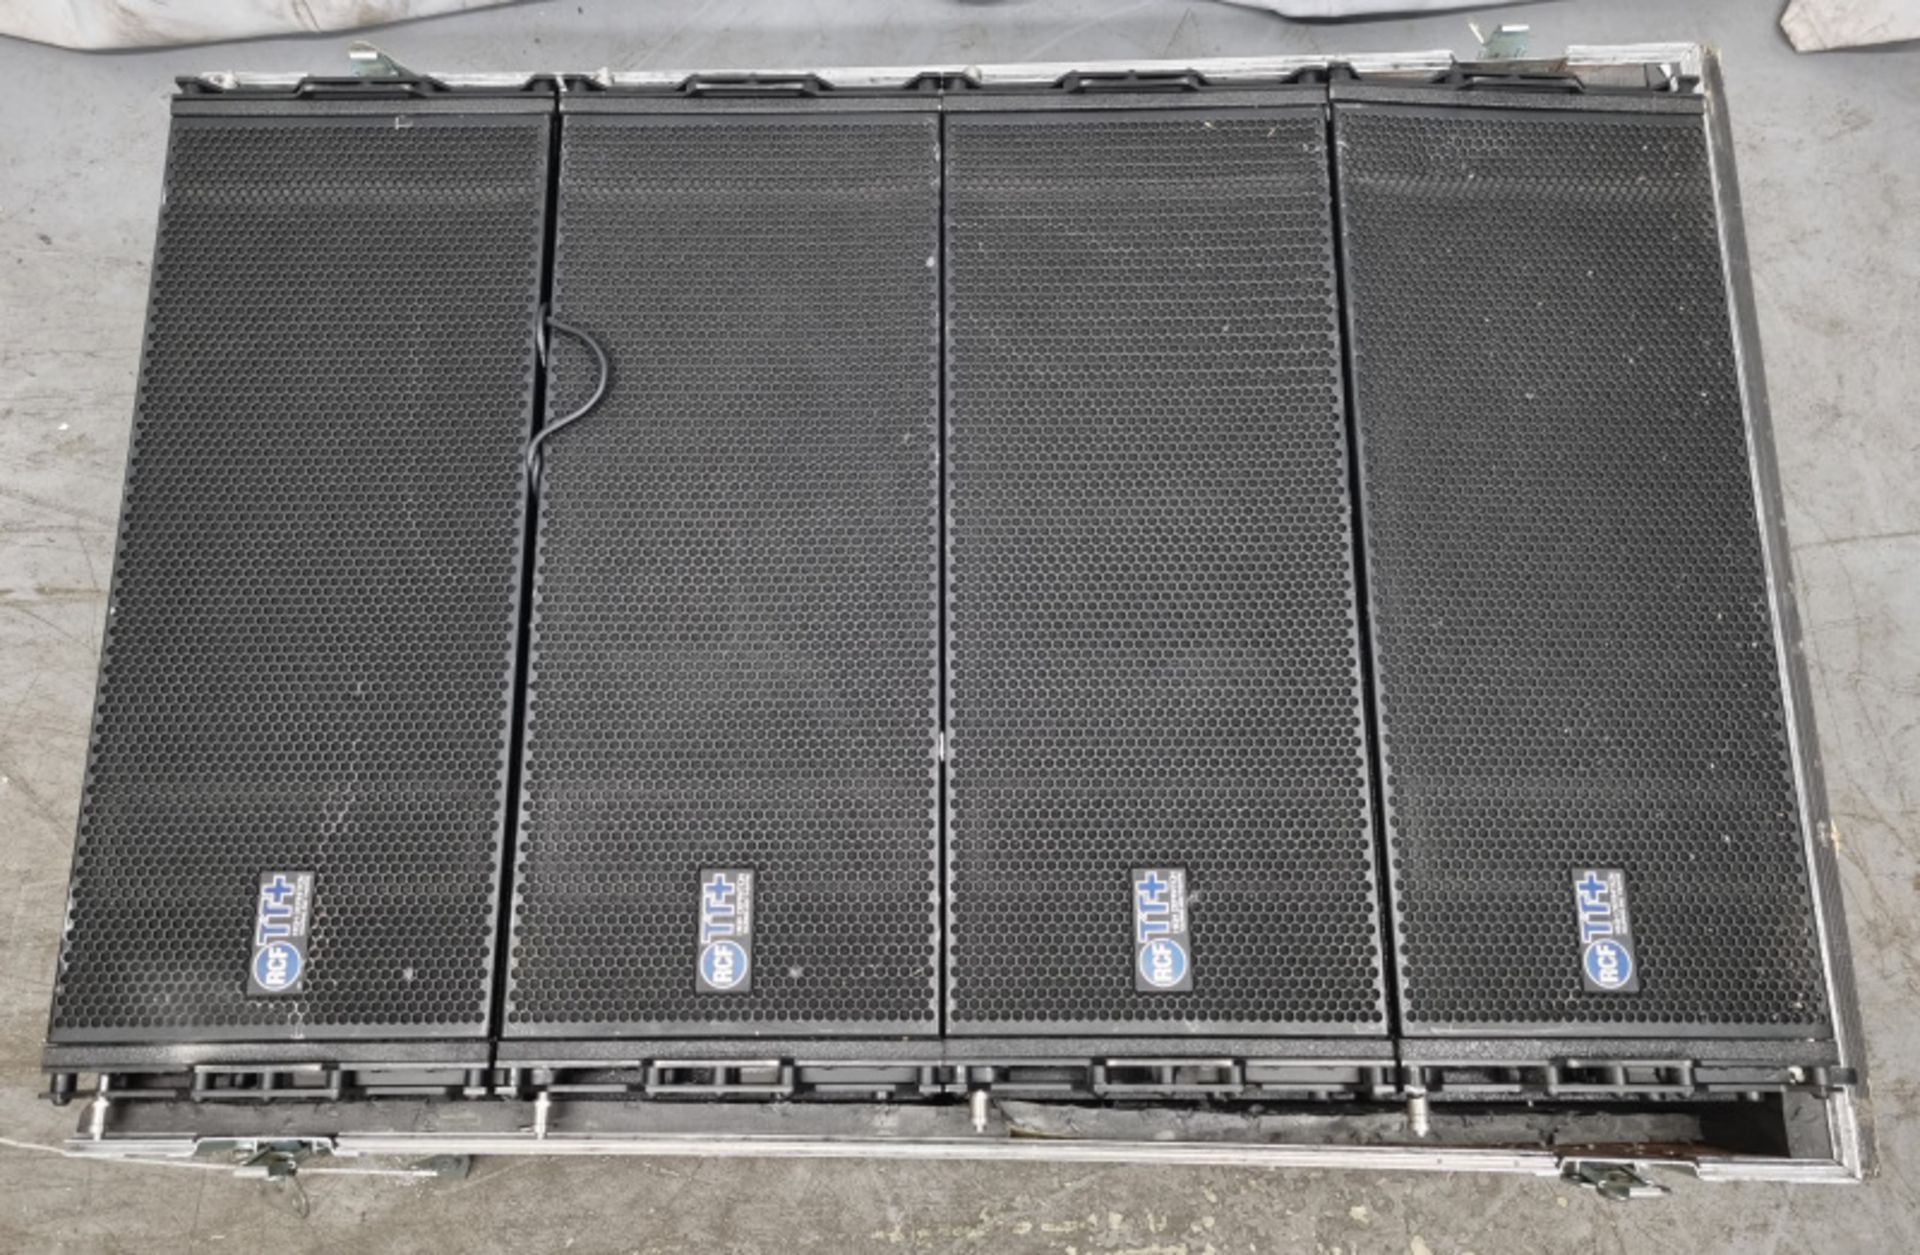 4 x RCF TTL33A 3-way active line array module with flying frame in flight case